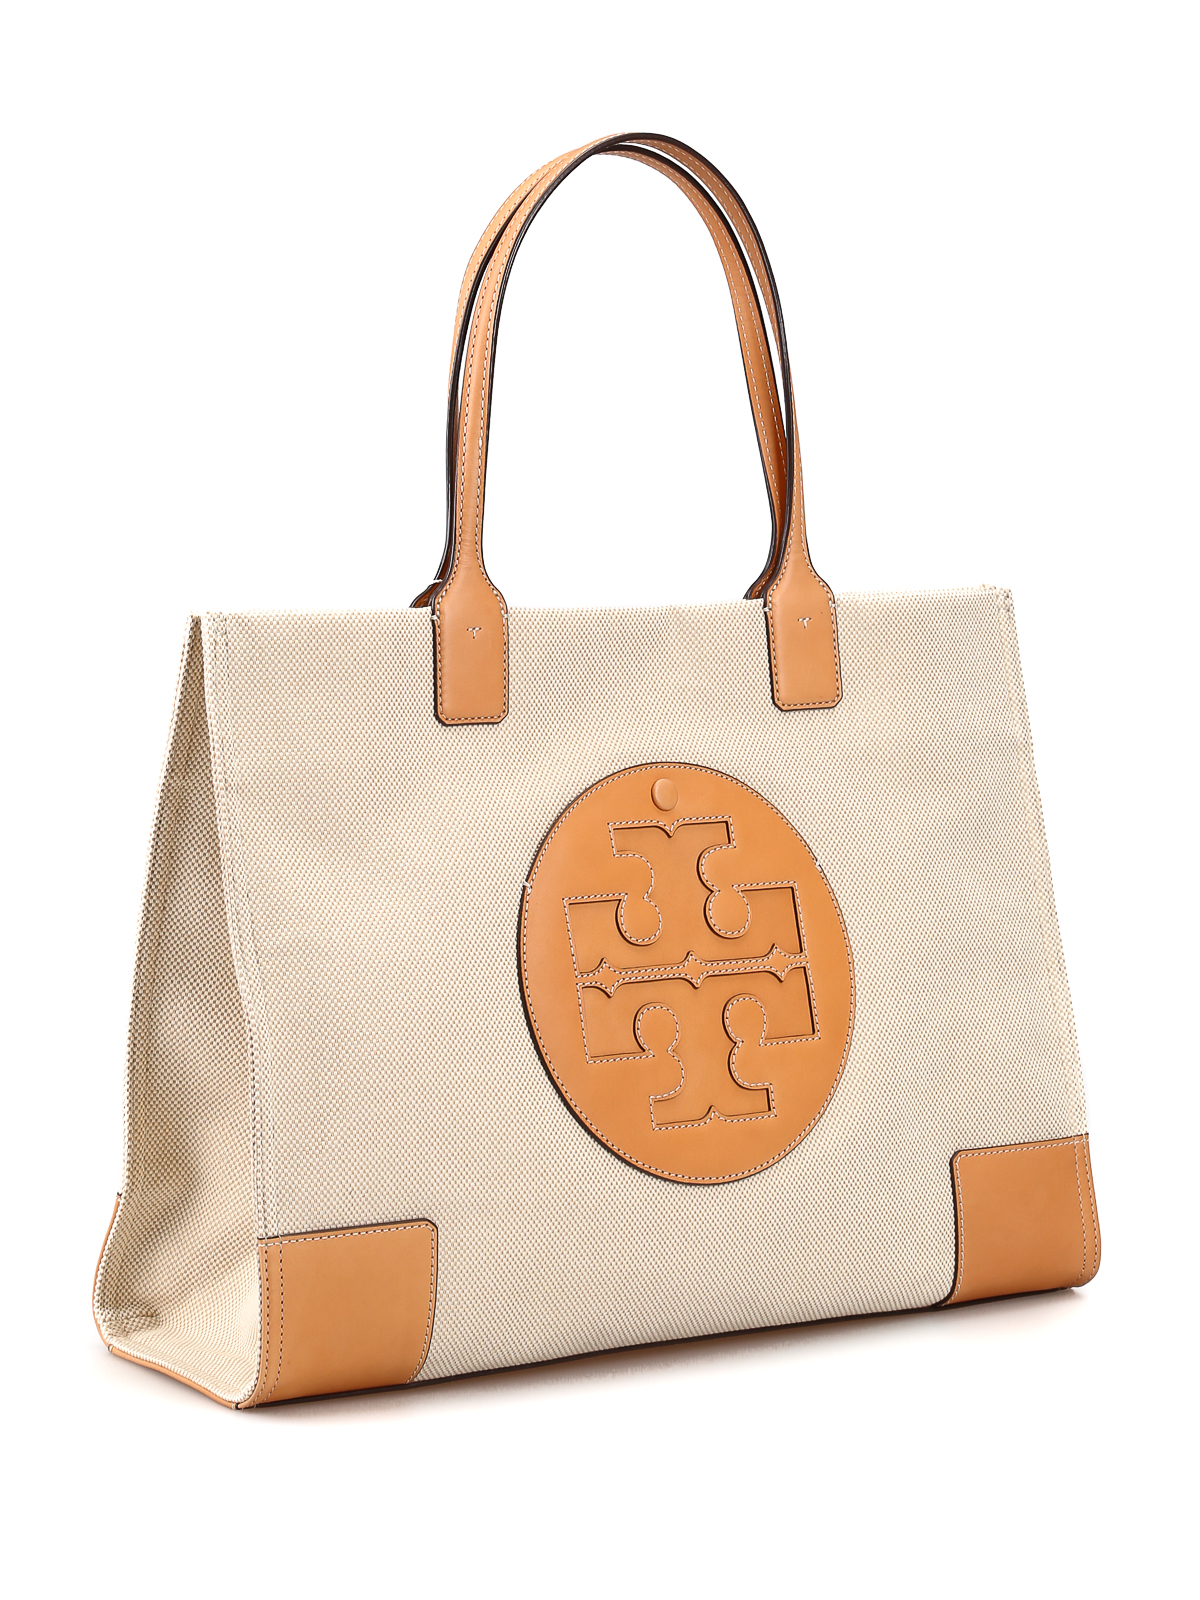 Tory Burch Black Leather and Canvas Ella Tote Tory Burch